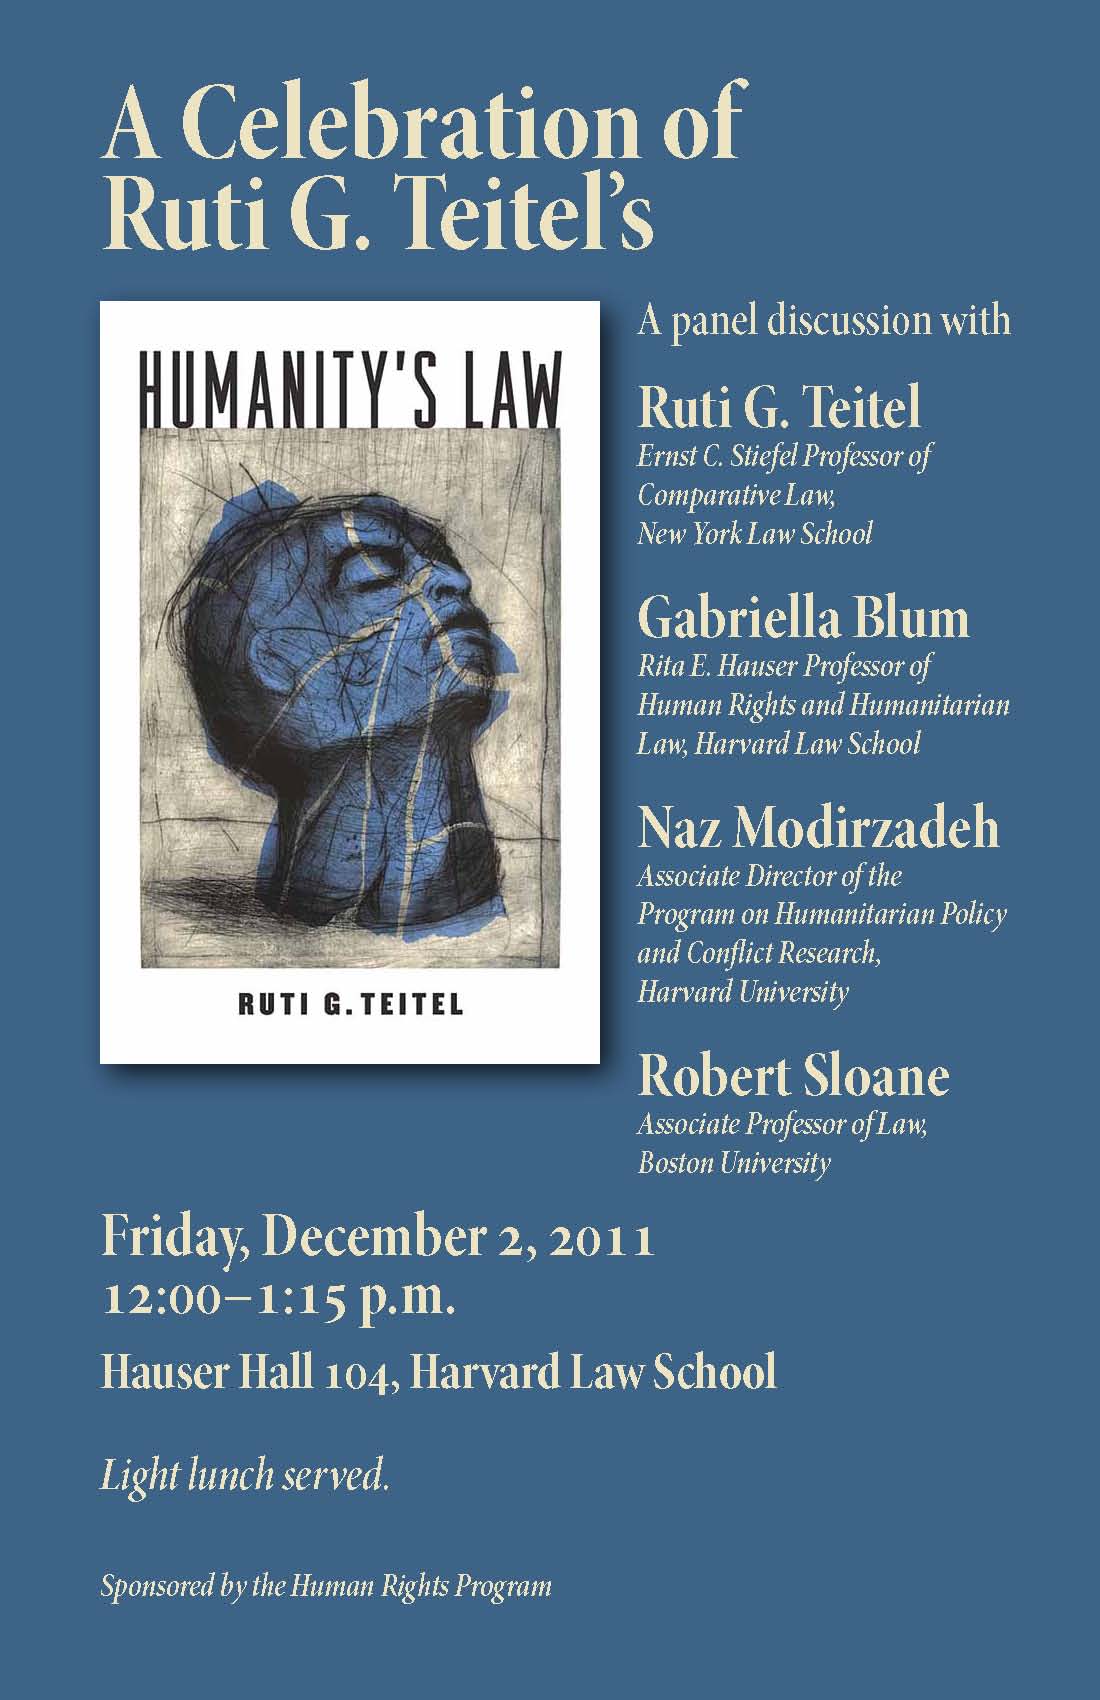 Event poster has a book cover on it for "humanity's law," with a head illustrated in blue tilted back.